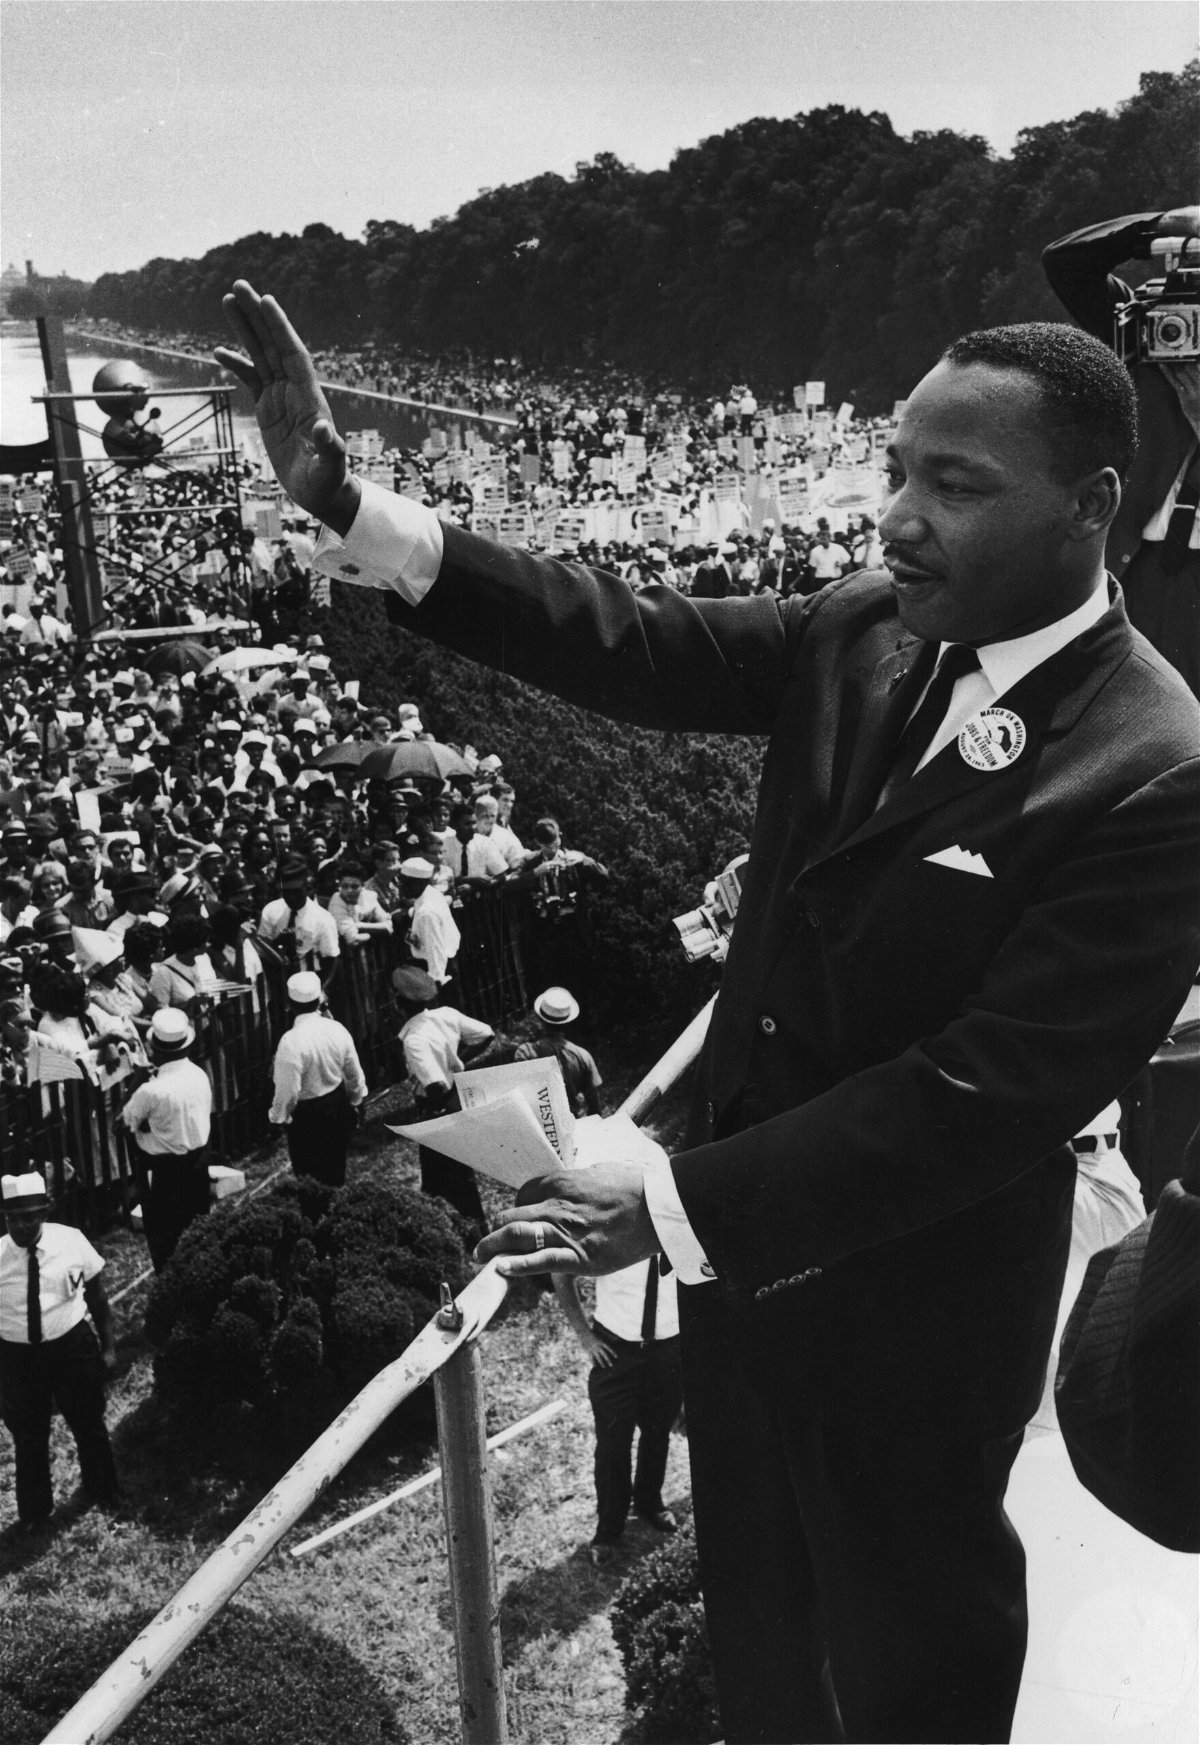 <i>Washington Bureau/Getty Images</i><br/>American civil rights leader Dr. Martin Luther King Jr. (1929-1968) delivers his 'I have a dream' speech to participants in the March on Washington